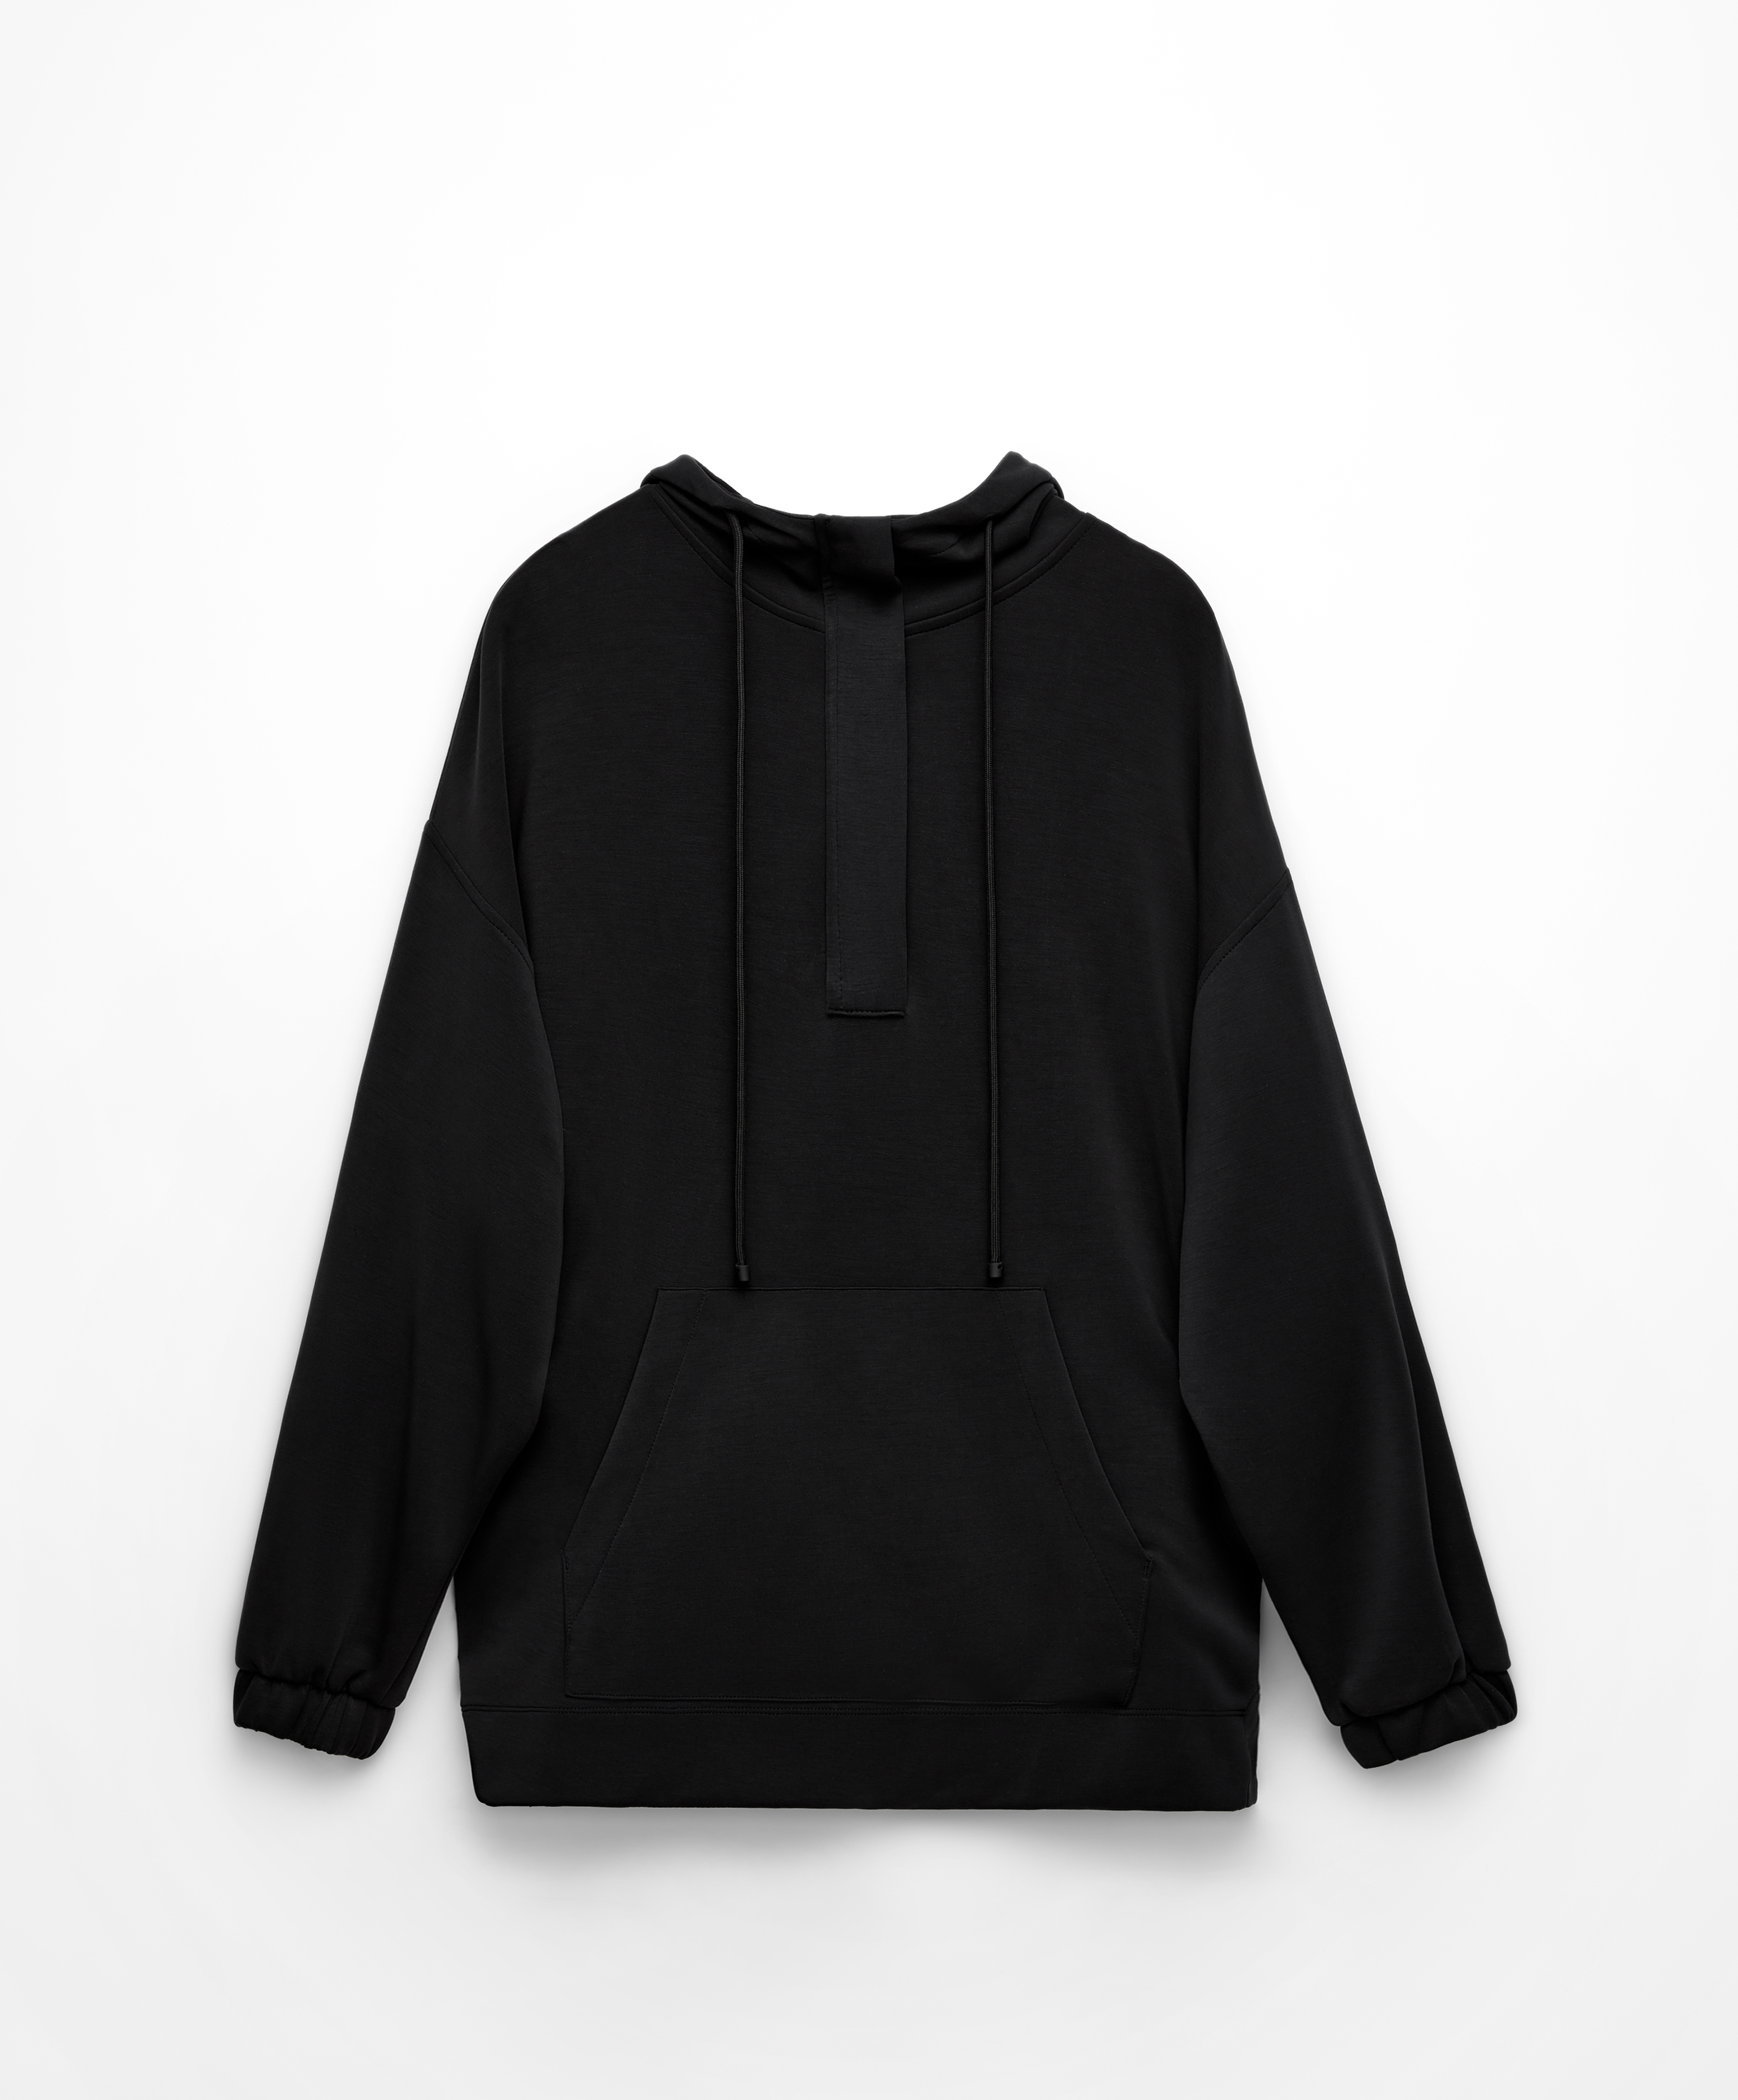 Oversize sweatshirt with soft-touch modal and zip